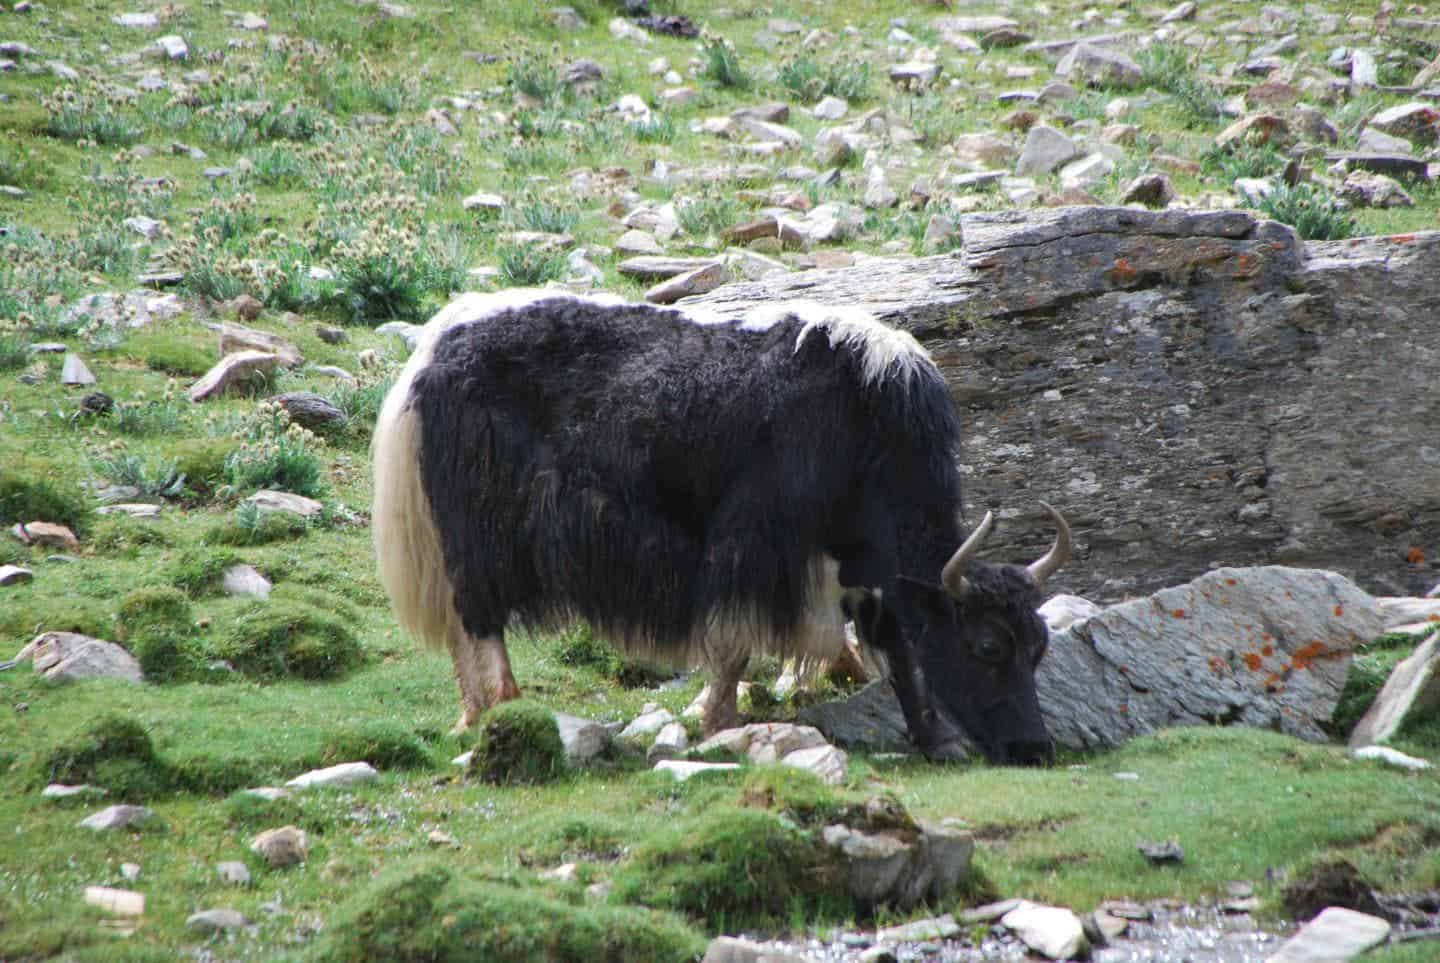 Large grazing animals have a strong selective force on plants, certain plants have evolved traits to thrive on pastoral landscapes. In the Himalayas, yaks (such as the one depicted here) were a significant evolutionary driver. Image credits: Robert Spengler.